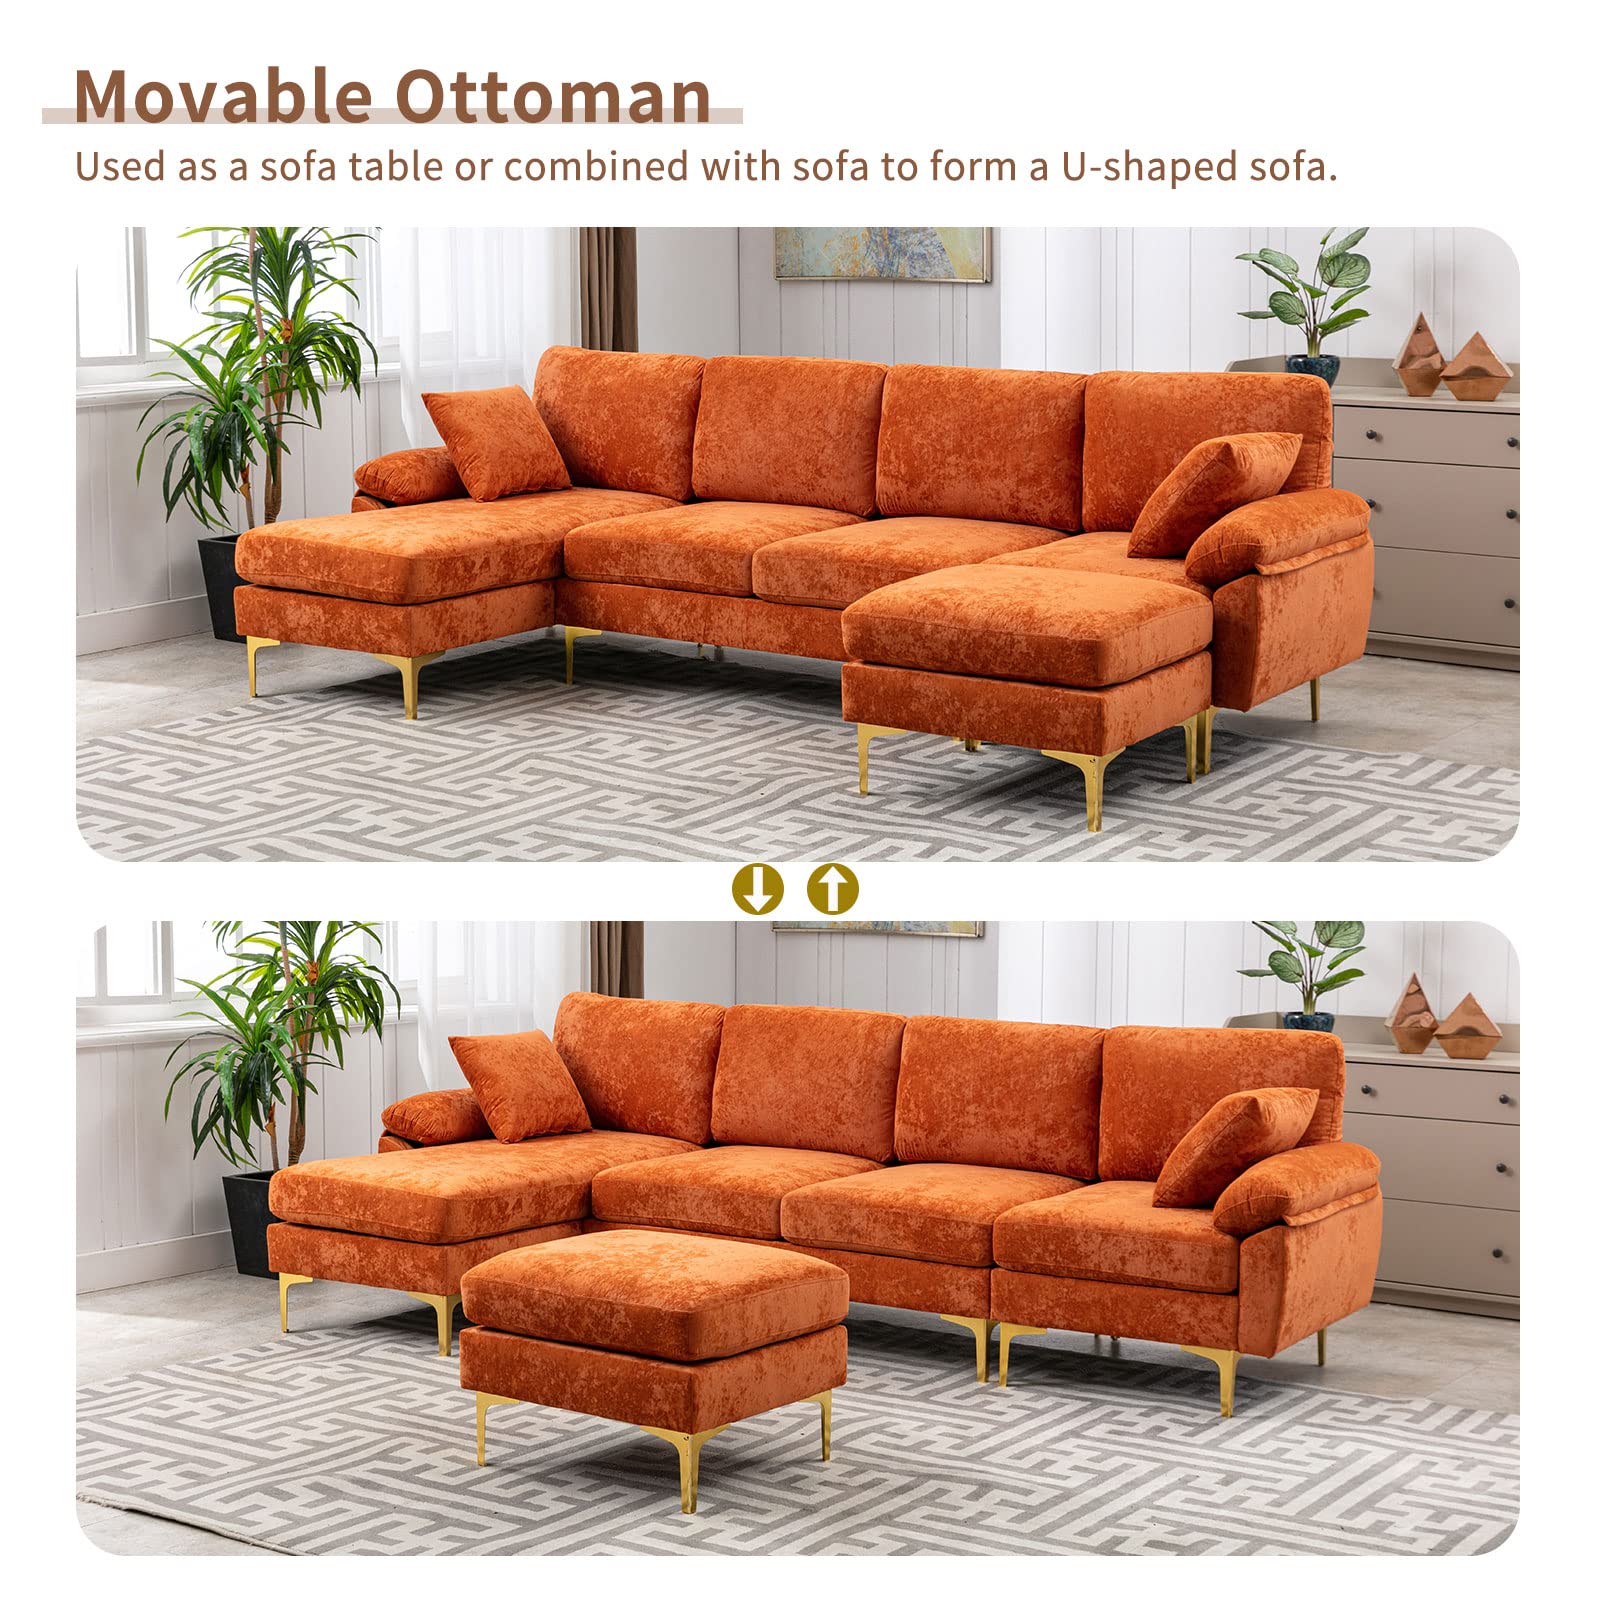 KIVENJAJA U-Shaped Sectional Sofa Couch, Modern Velvet L-Shaped Couch Set with Chaise Lounge, Ottoman and Pillows for Living Room Office Apartment, 114 inches (Orange)